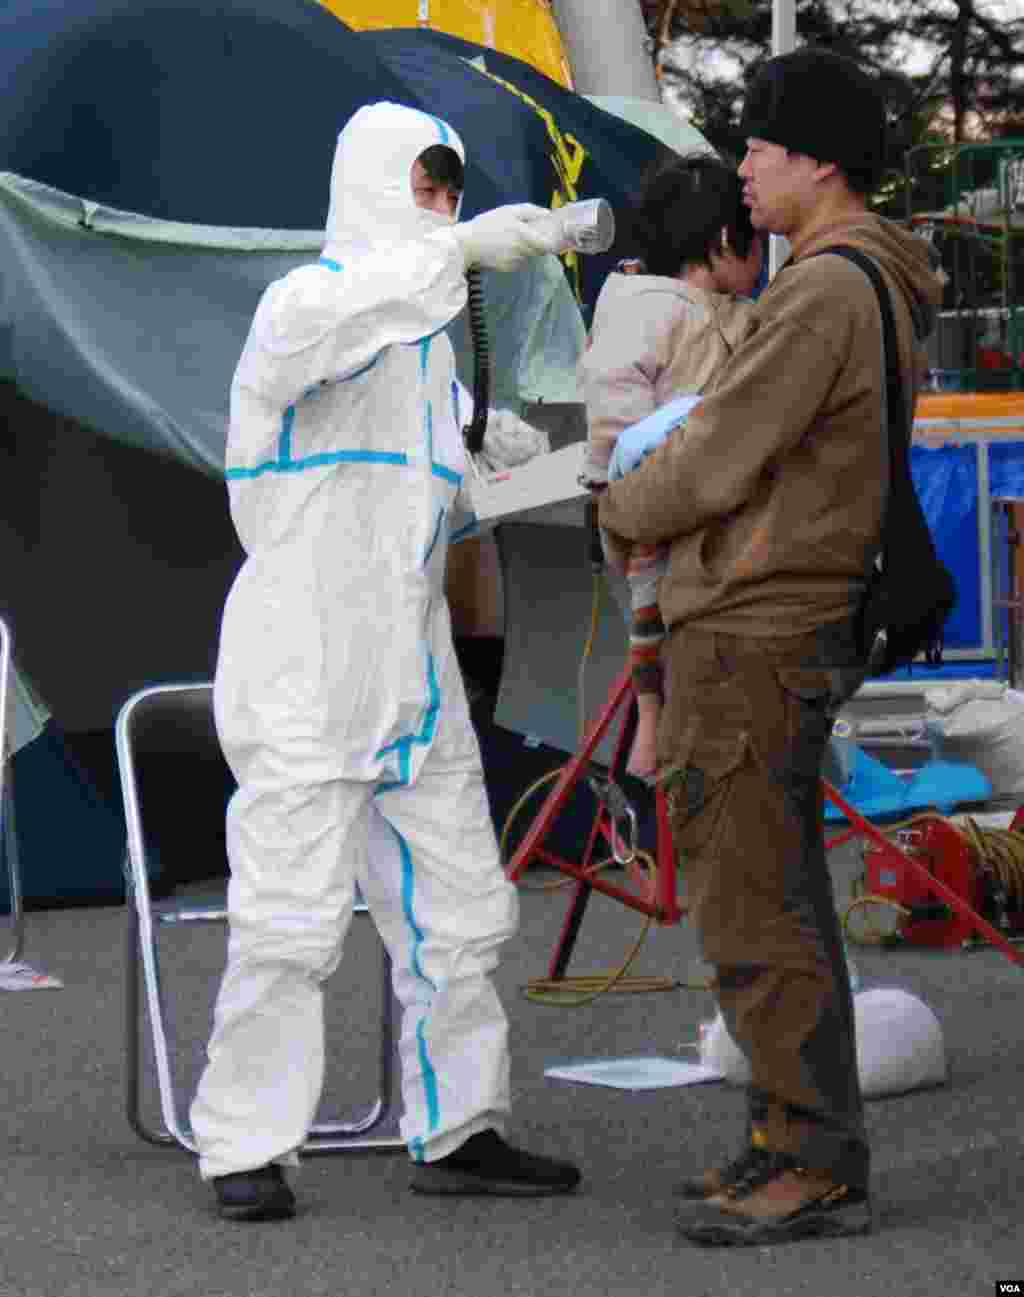 A man and a child are checked for radiation exposure in Fukushima in wake of the reactor meltdowns, March 13, 2011. (S. Herman/VOA)